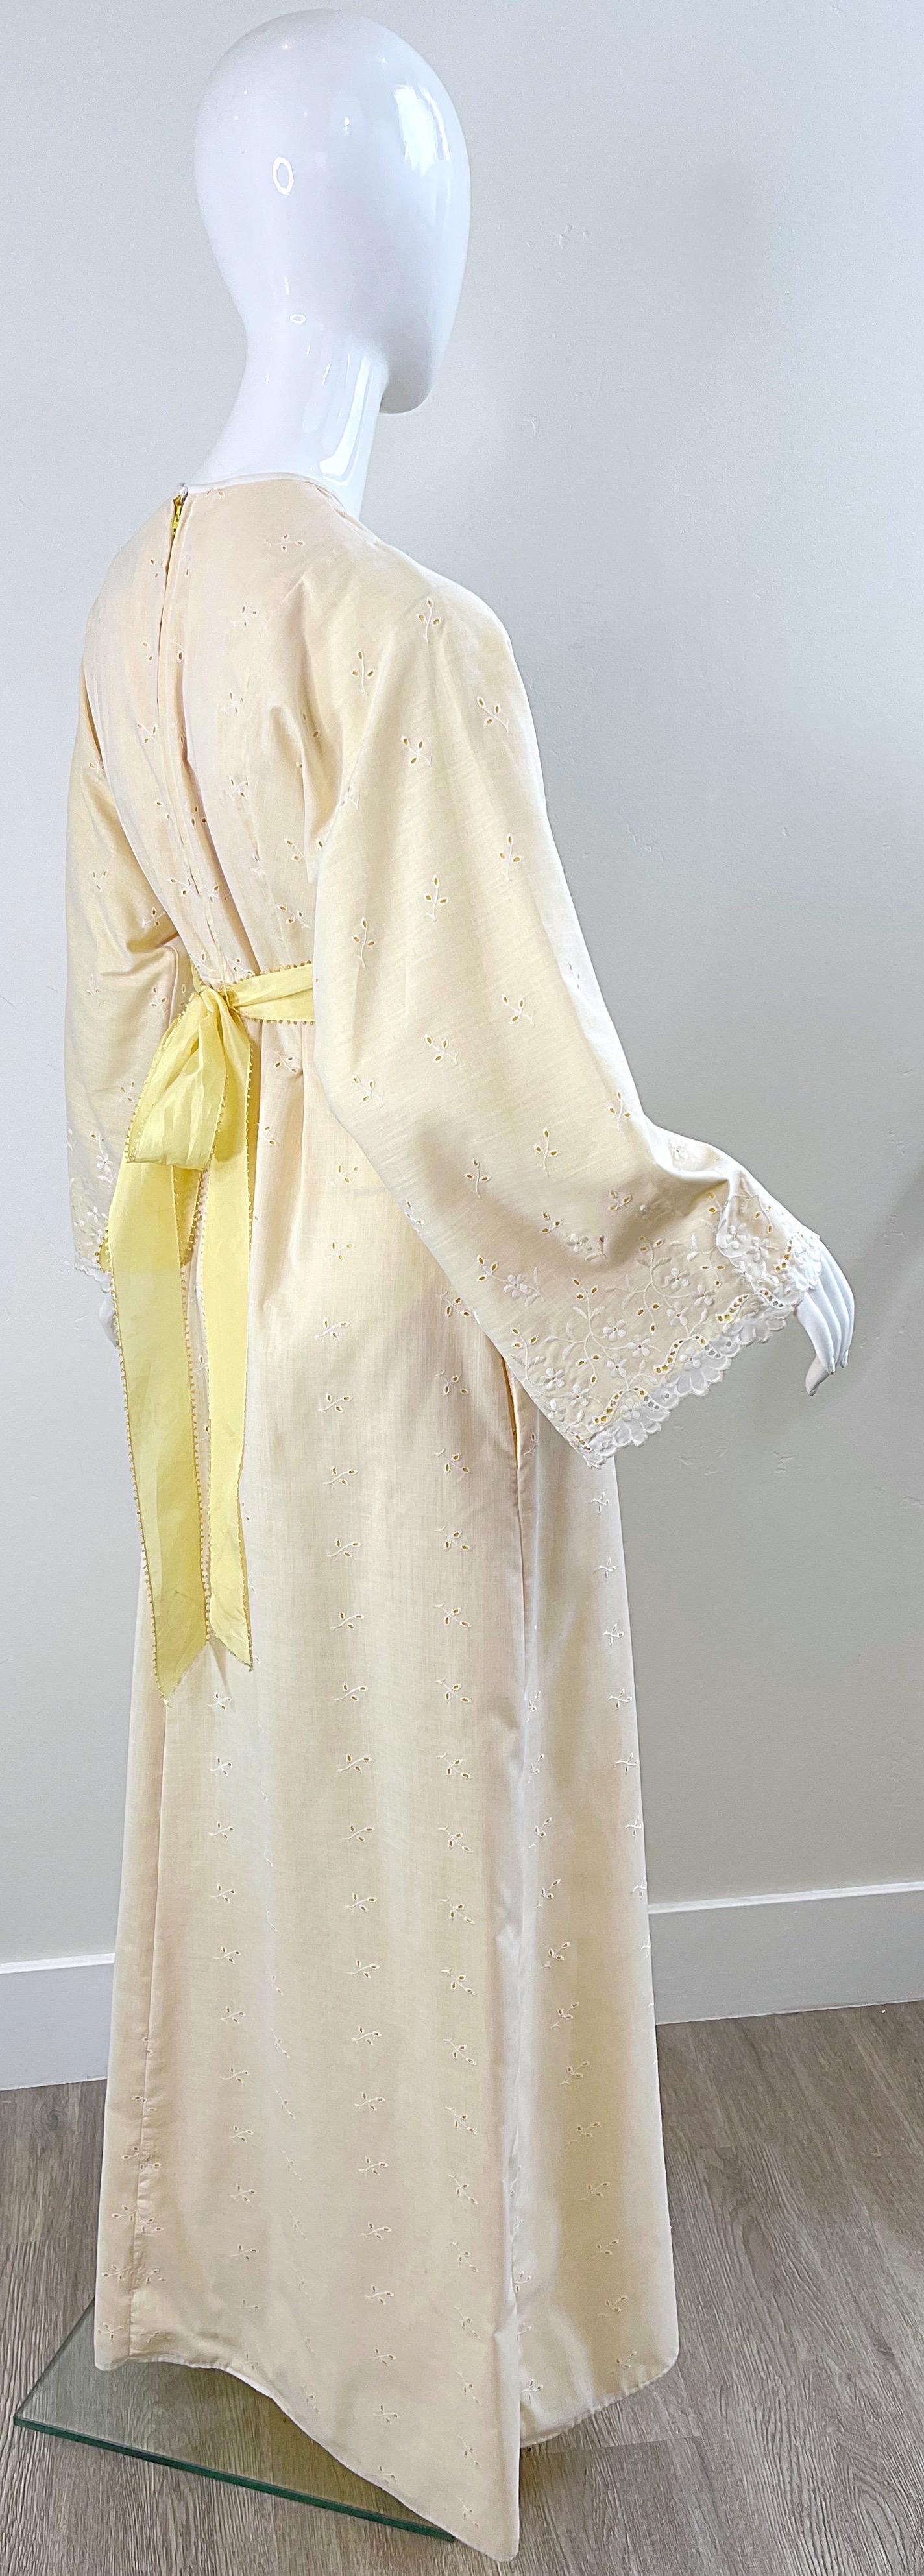 1970s Bill Tice Pale Yellow + White Cotton Eyelet Vintage 70s Maxi Dress For Sale 3